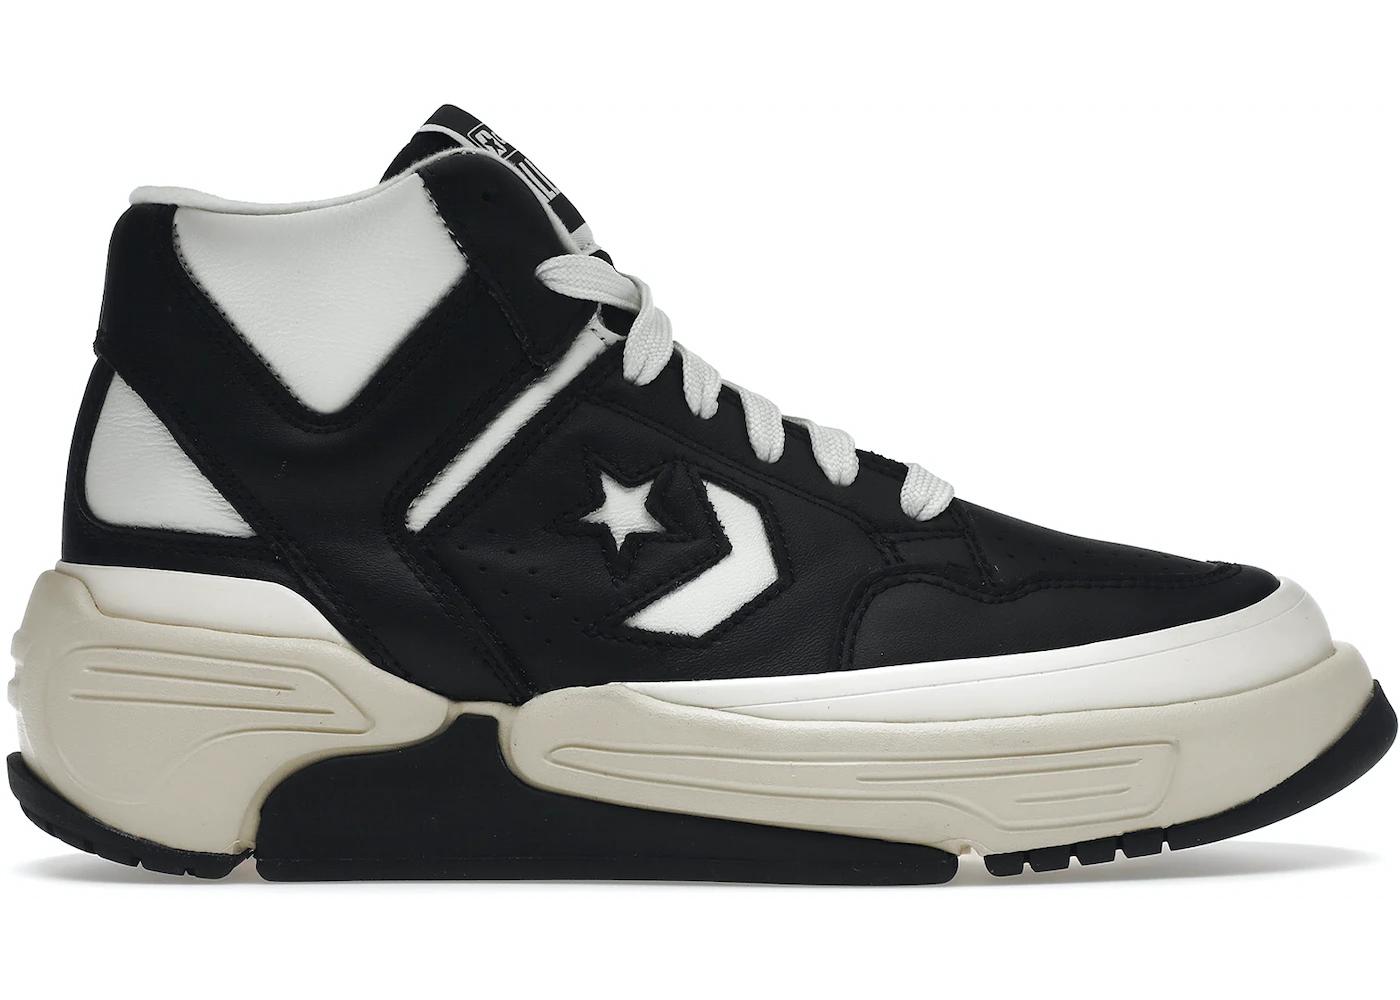 Weapon CX Mid Black by CONVERSE